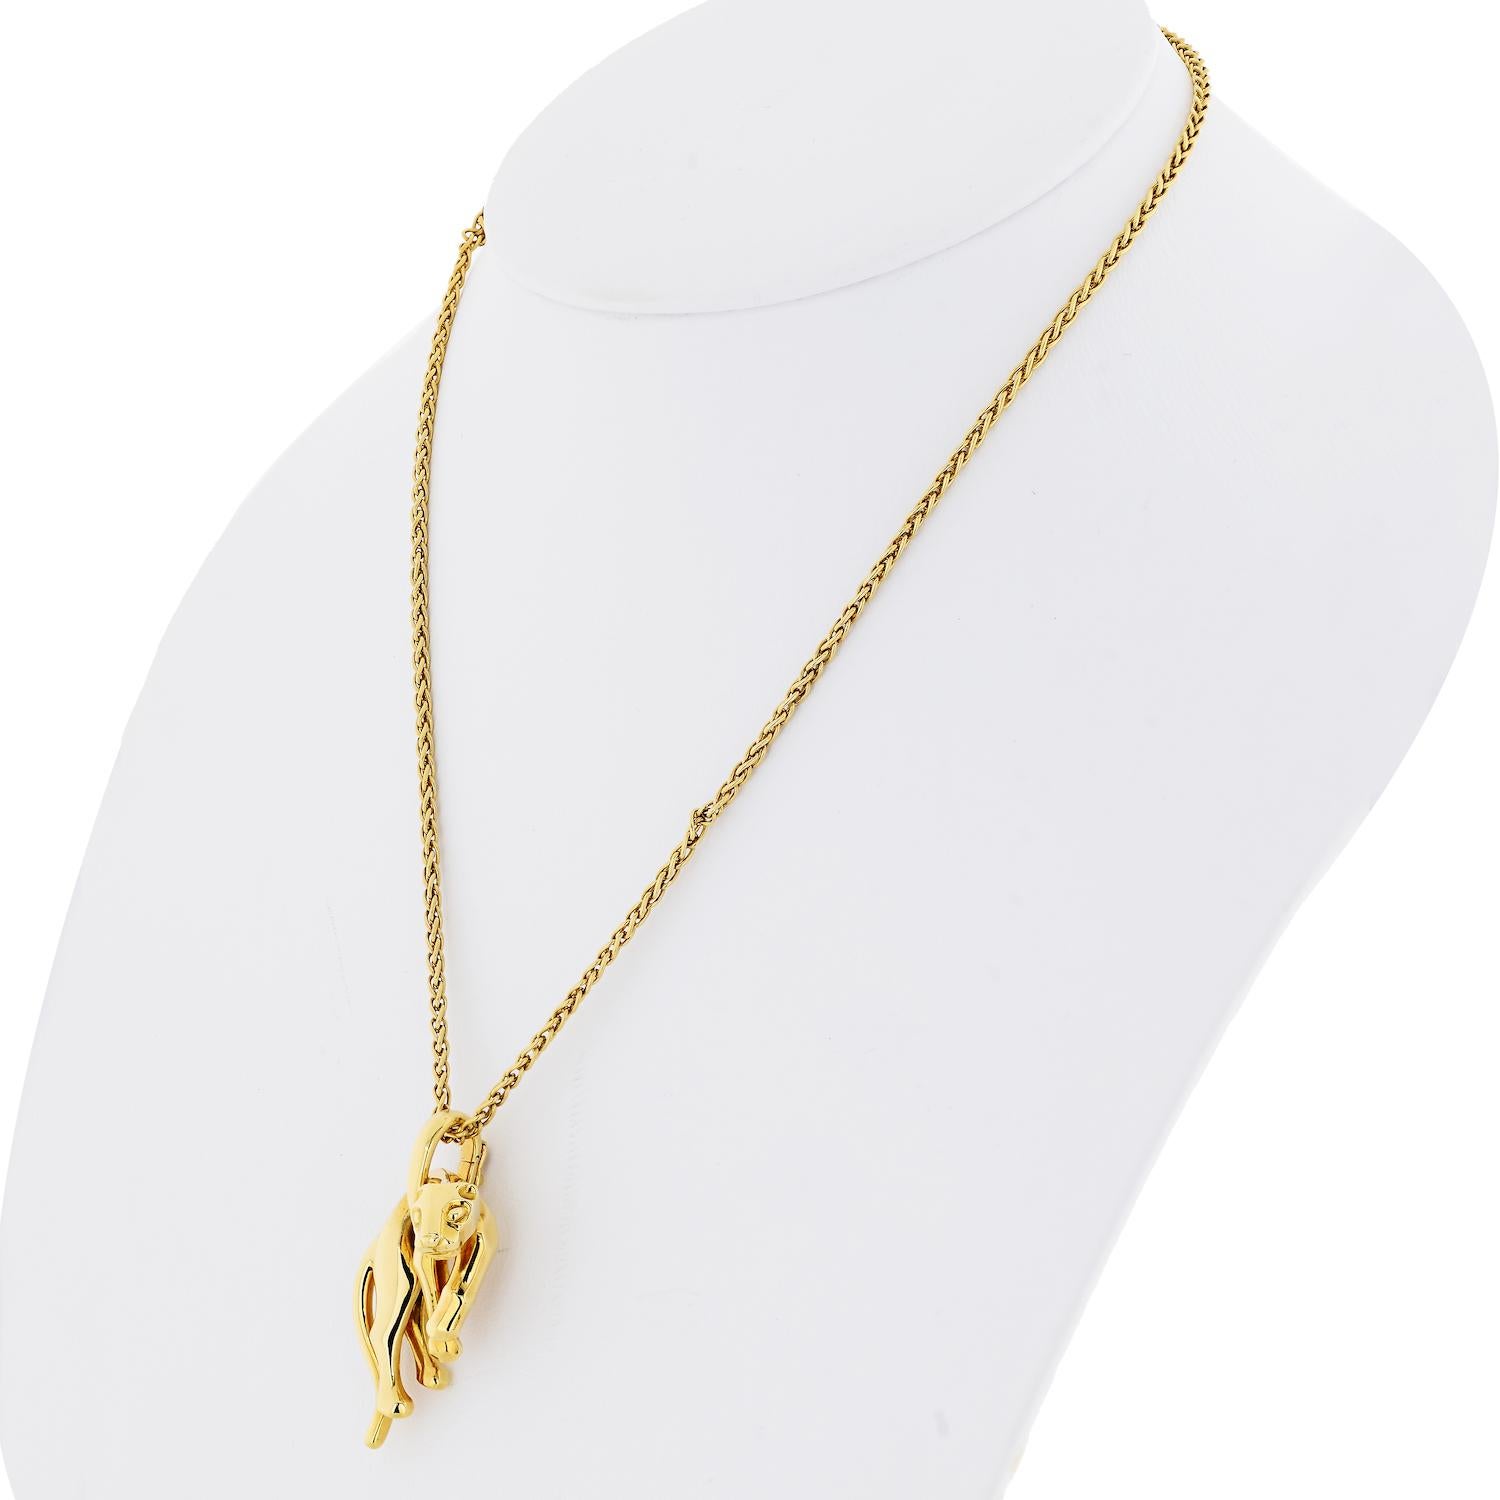 Cartier 18K Yellow gold Panthere pendant on a chain.

Gorgeous 18k yellow gold panthere is an exemplary representative of the house of Cartier. It is in impeccable condition. It is a very rare highly collectible piece! 
The pendant is fully marked